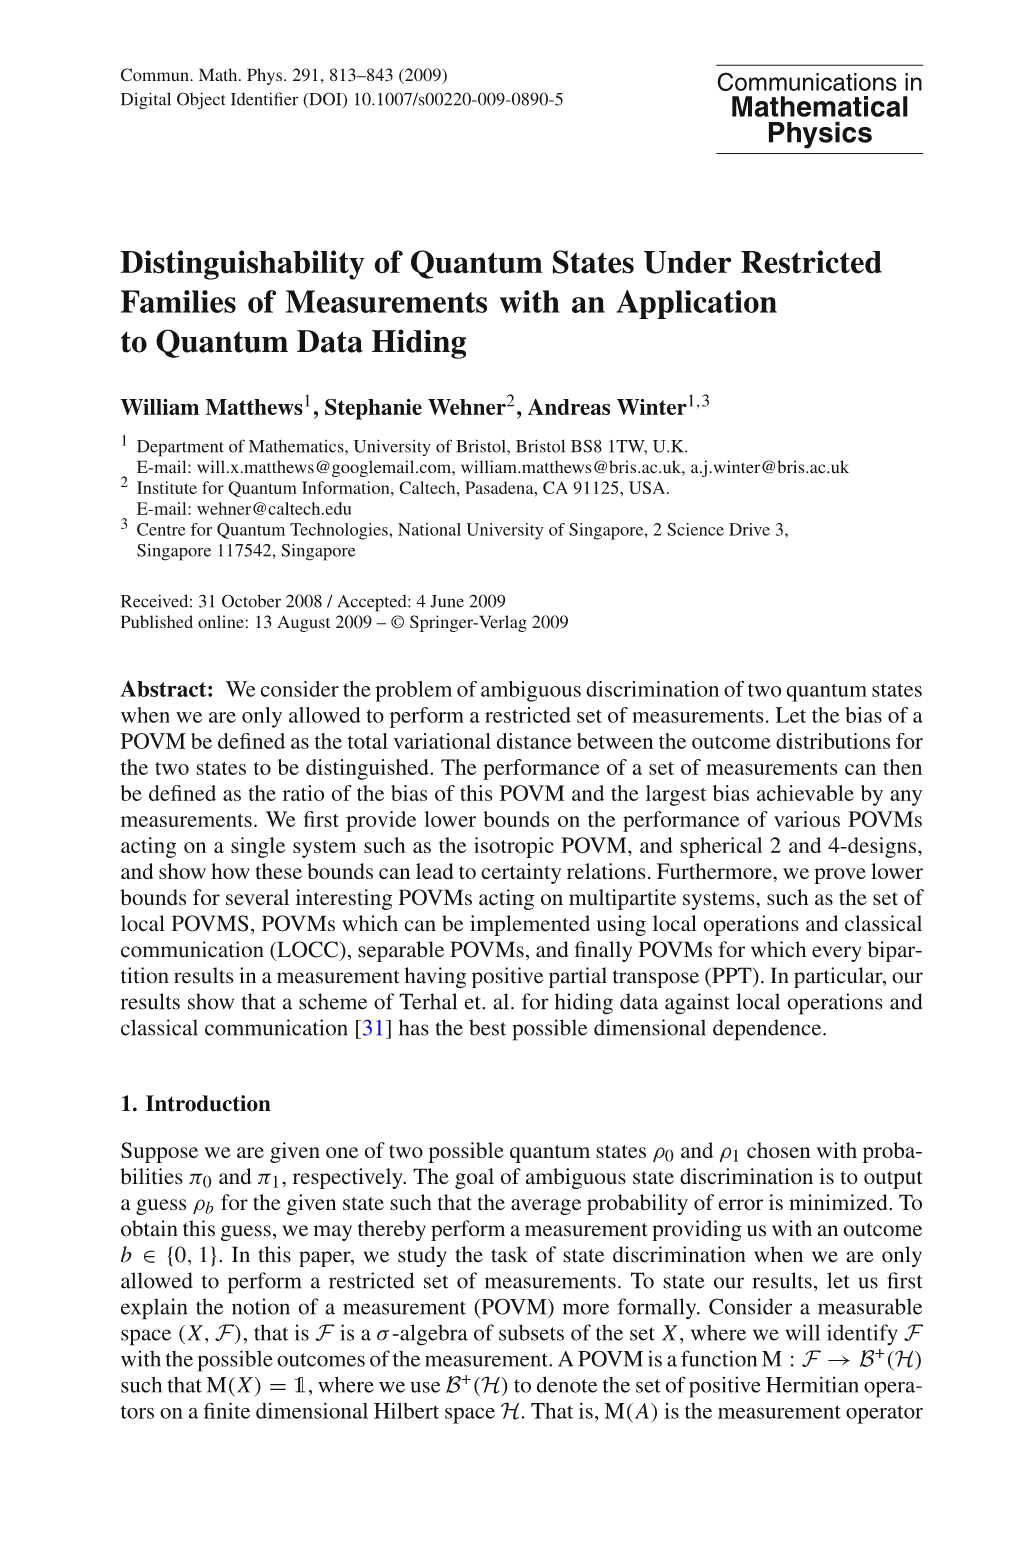 Distinguishability of Quantum States Under Restricted Families of Measurements with an Application to Quantum Data Hiding